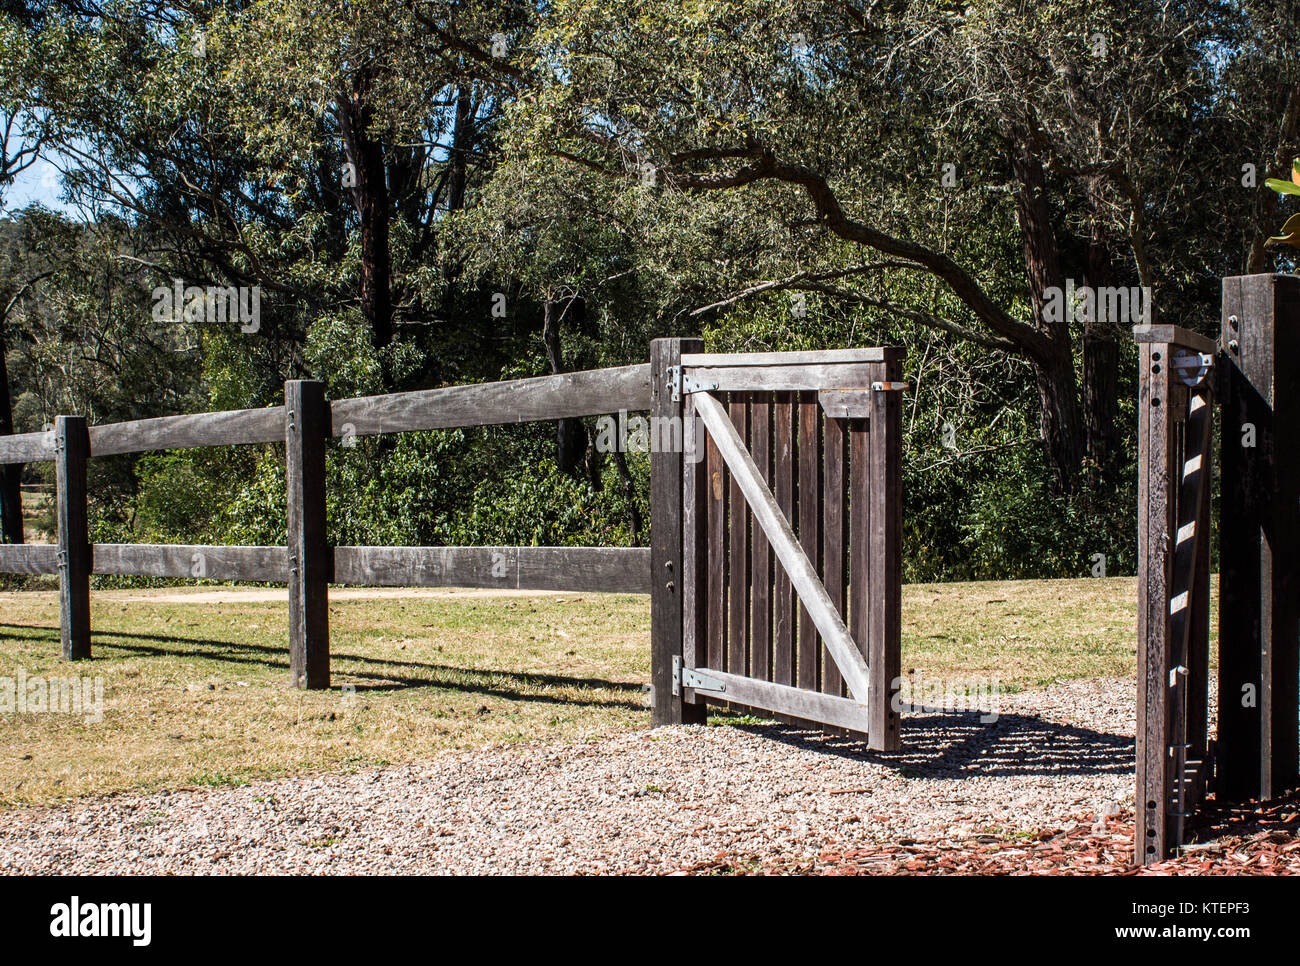 Wooden rural fence with open gate in sunshine with trees in background Stock Photo